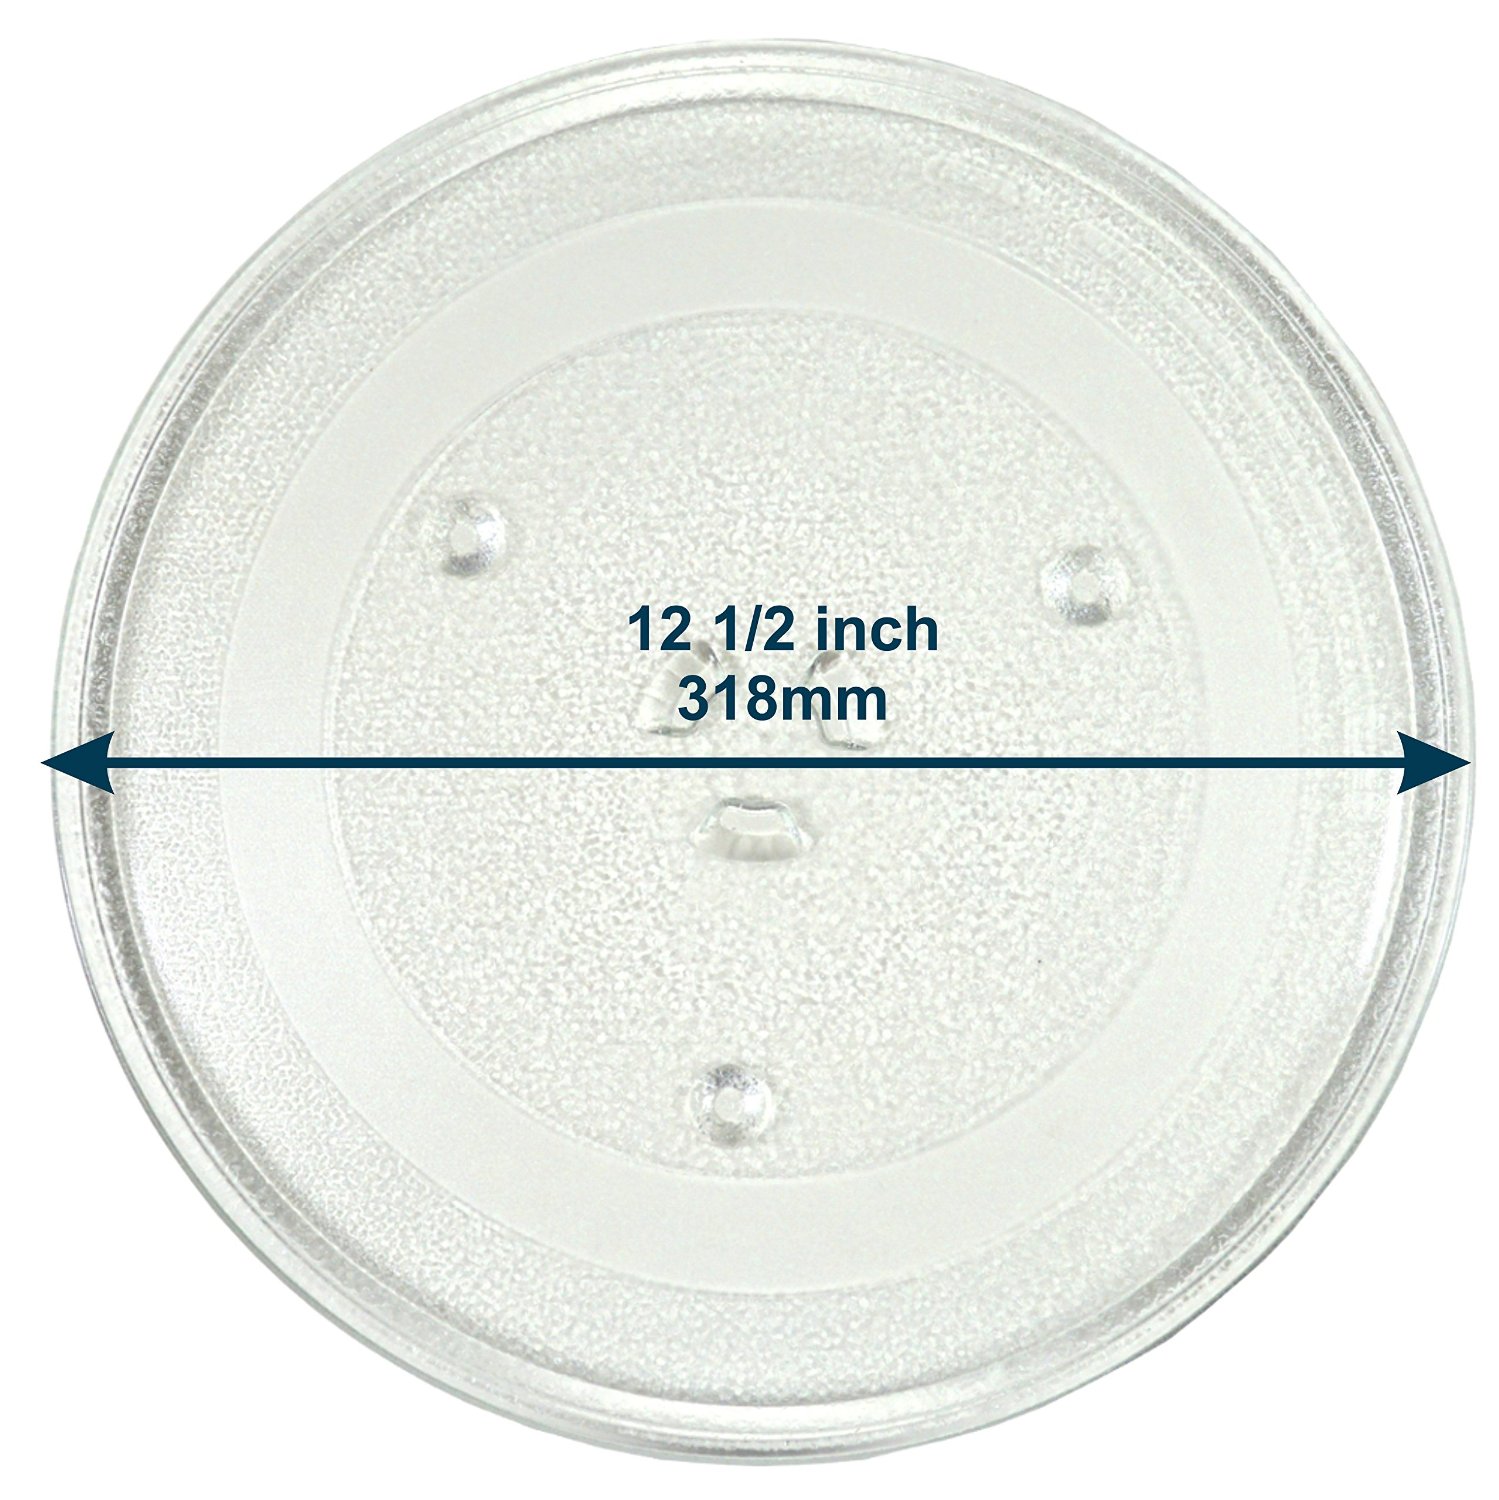 HQRP 12.5-inch Glass Turntable Tray for Daewoo 335A10 KOR-1 KOR-1A KOR-1A4 KOR-1A4H KOR145 KOR145Q KOR128 KOR128M Microwave Oven